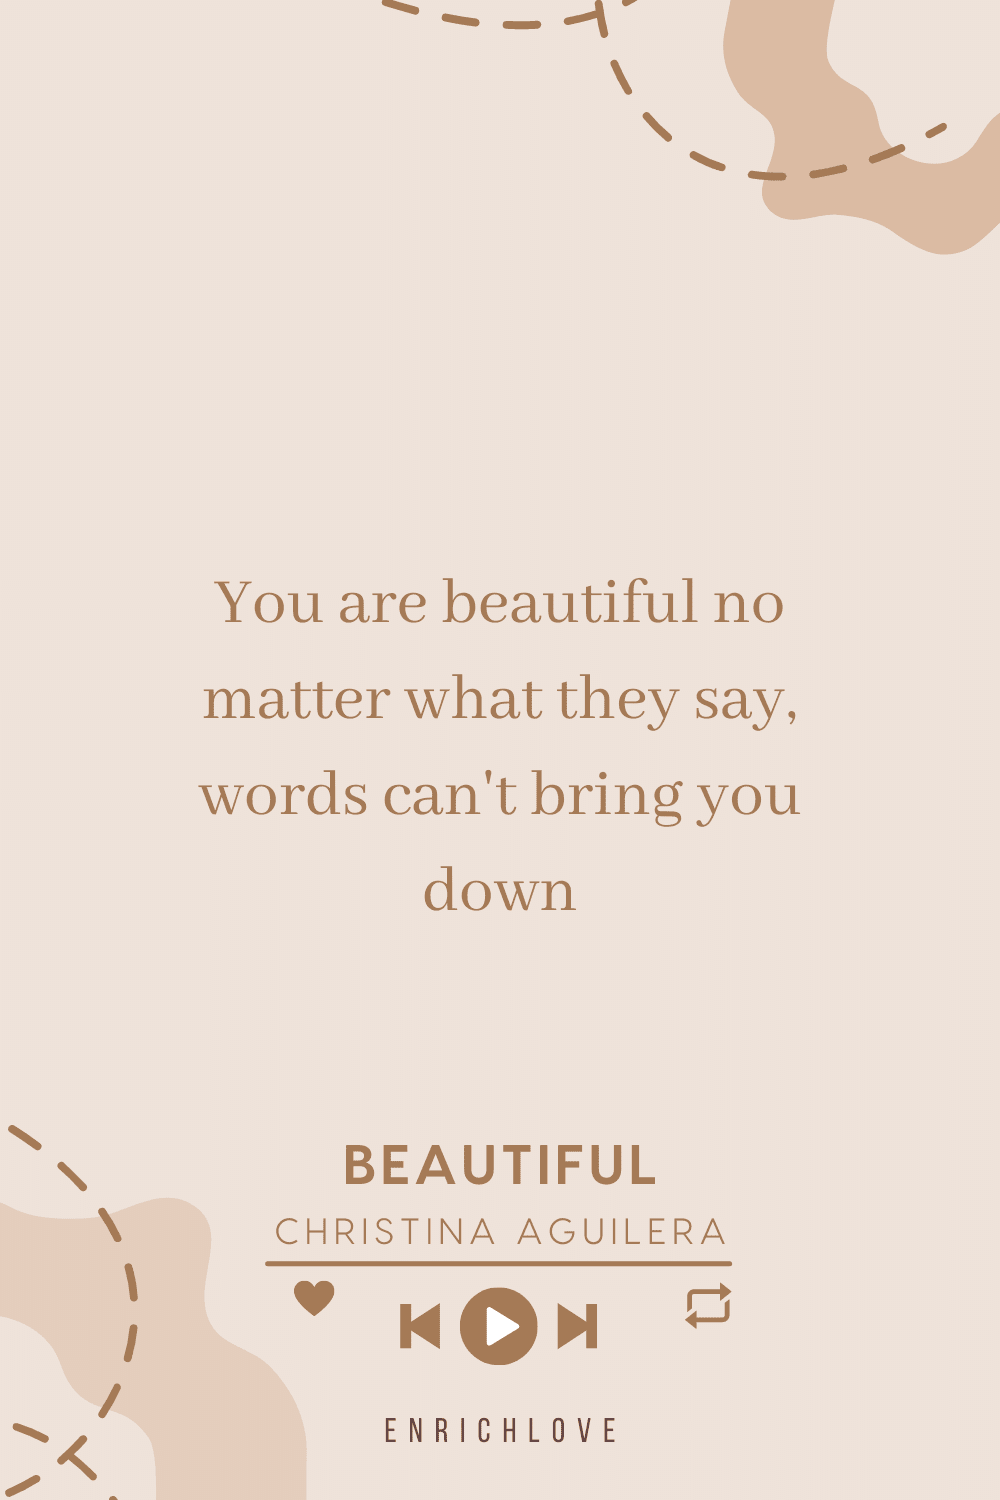 You are beautiful no matter what they say, words can't bring you down